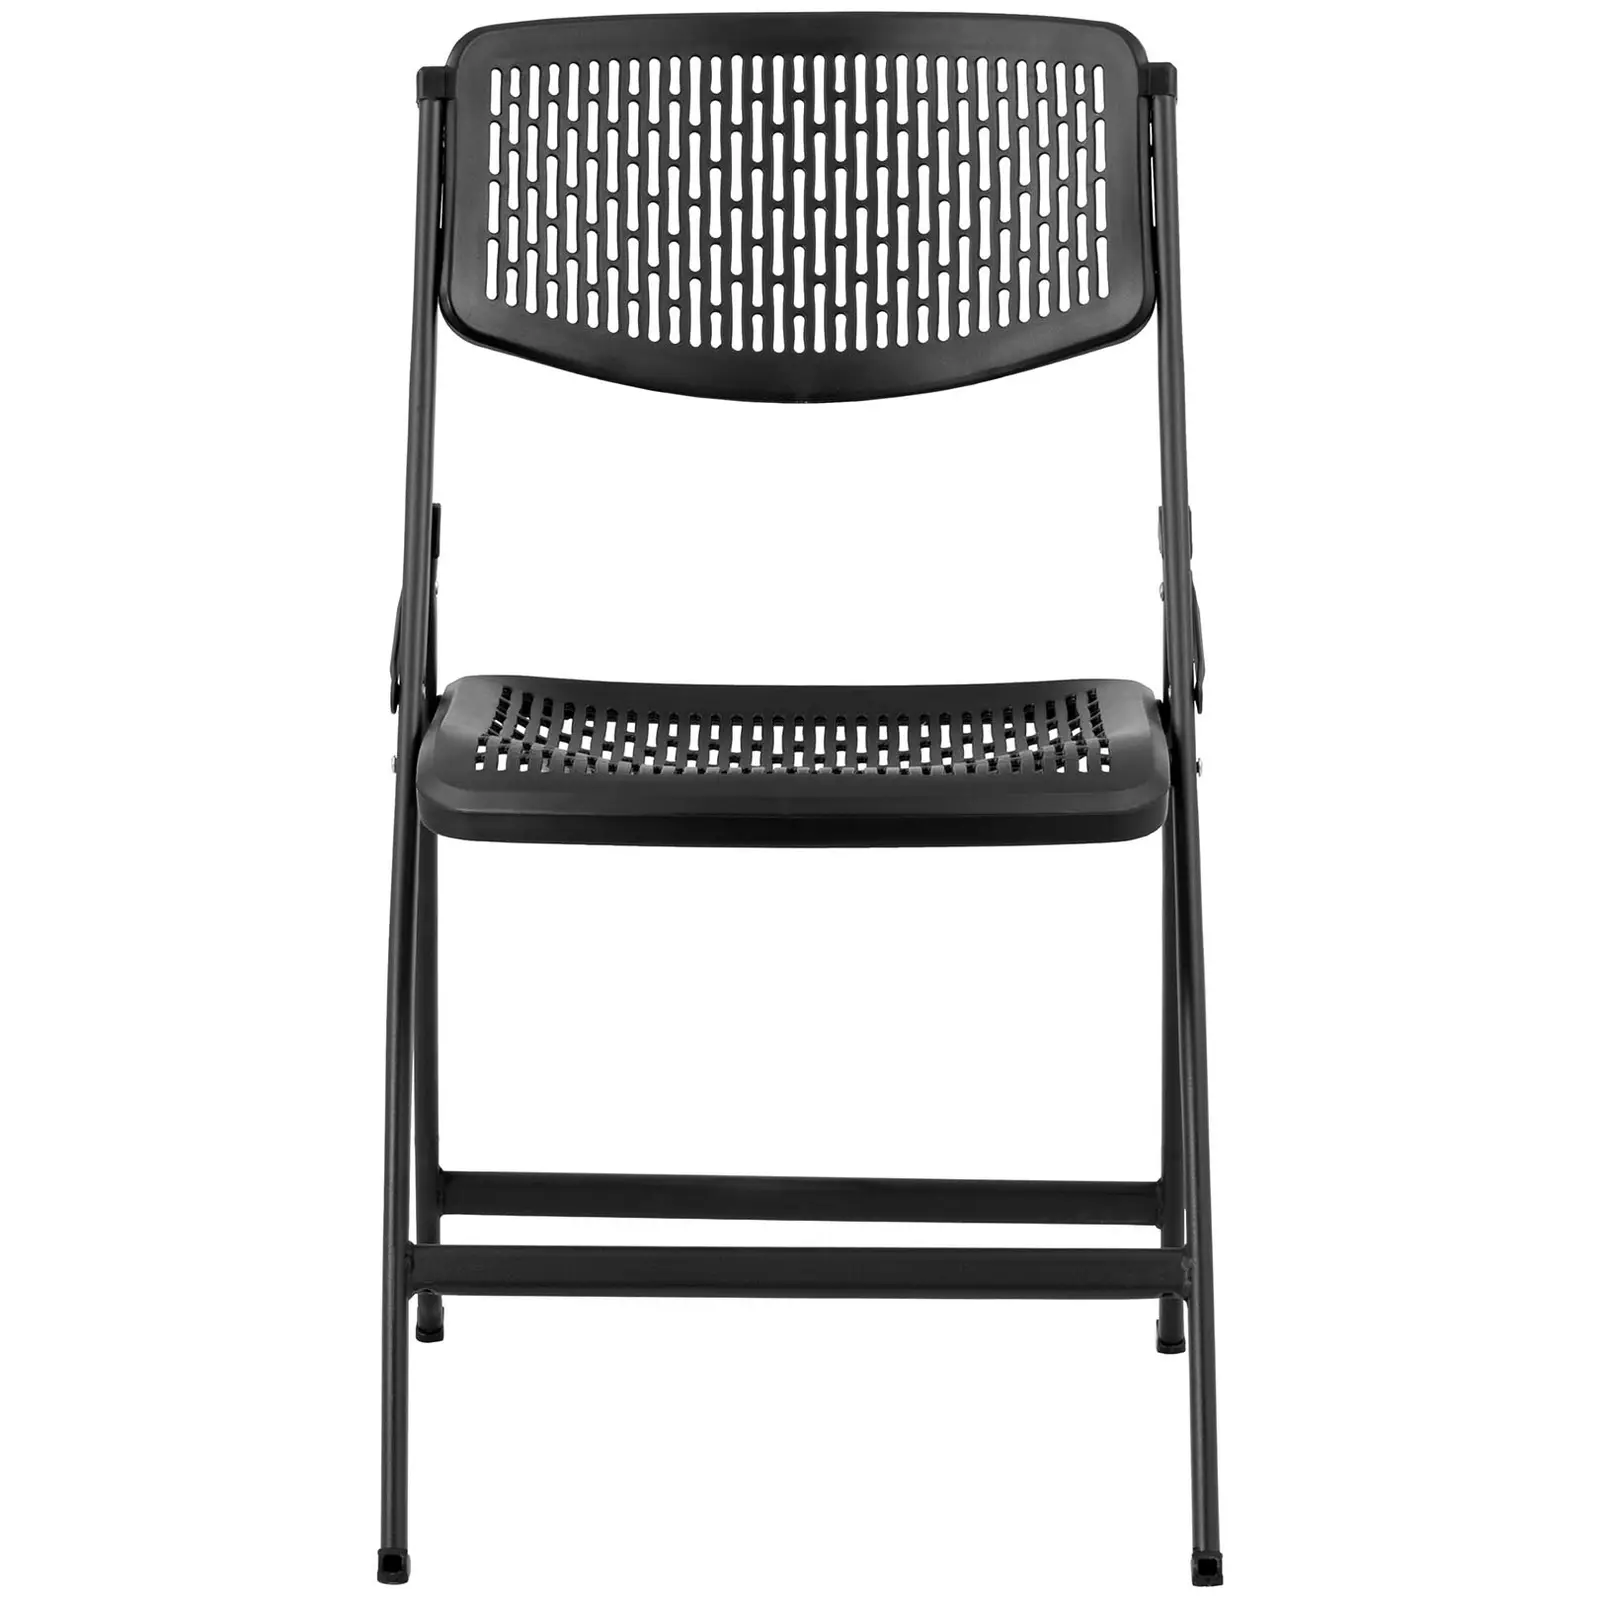 Chairs - set of 5 - up to 150 kg - seat area  430x430x440 mm - Black